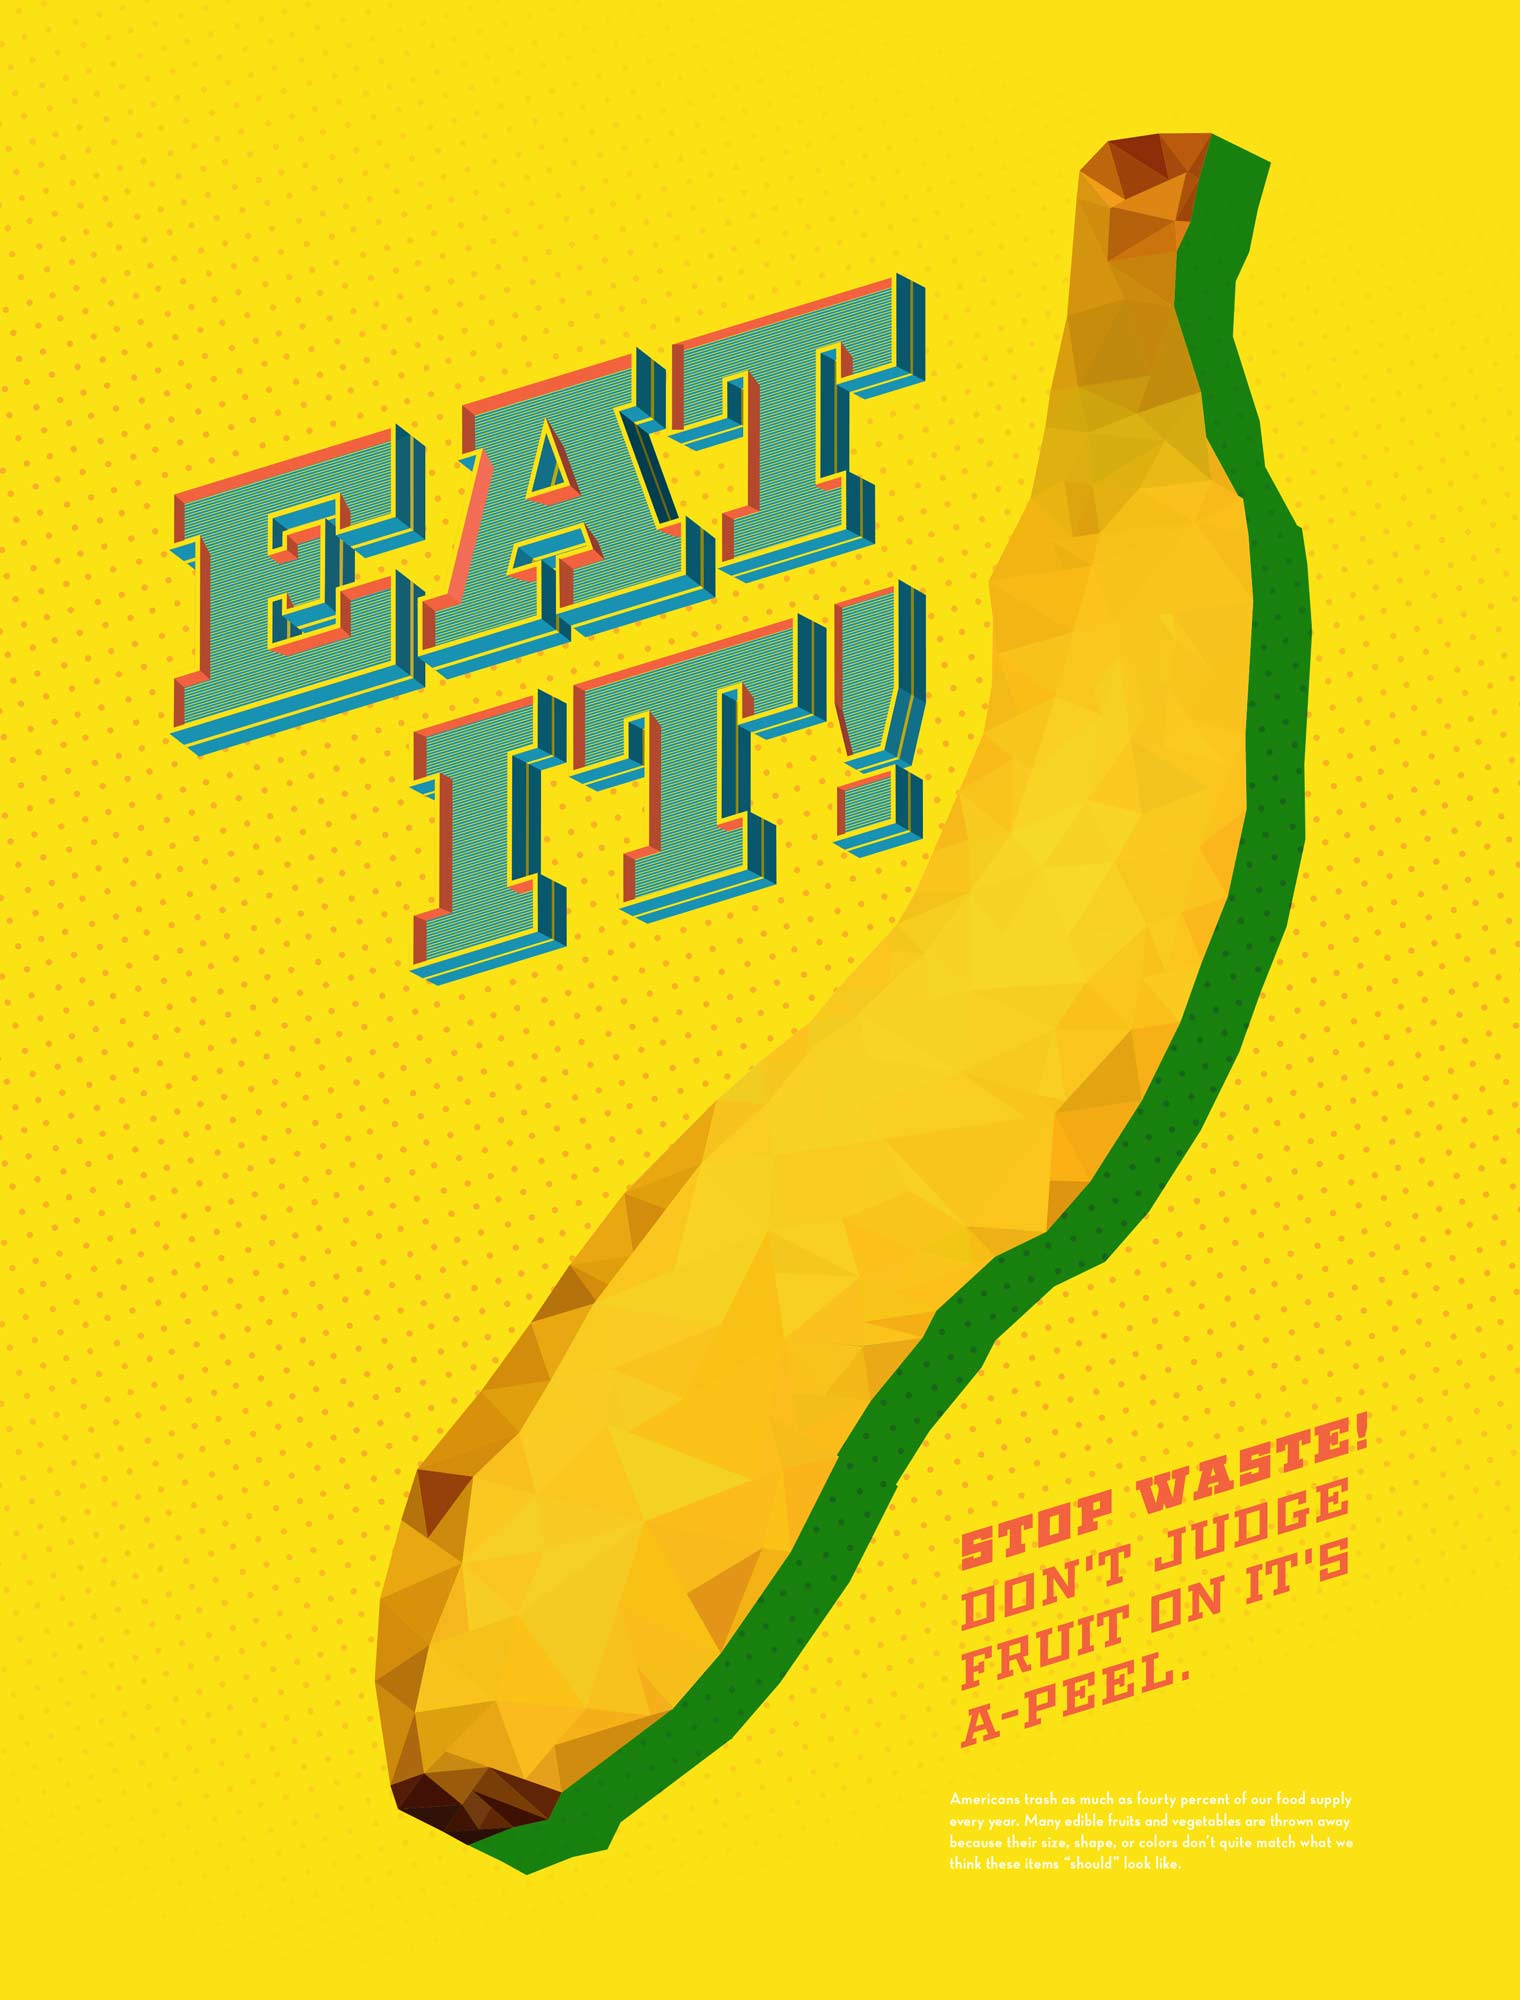 “With the famous line from the drag queen Latrice Royale as the focal point, “Eat It!” uses my humor and love for drag to bring attention to how we can help reduce food waste in our everyday lives.”